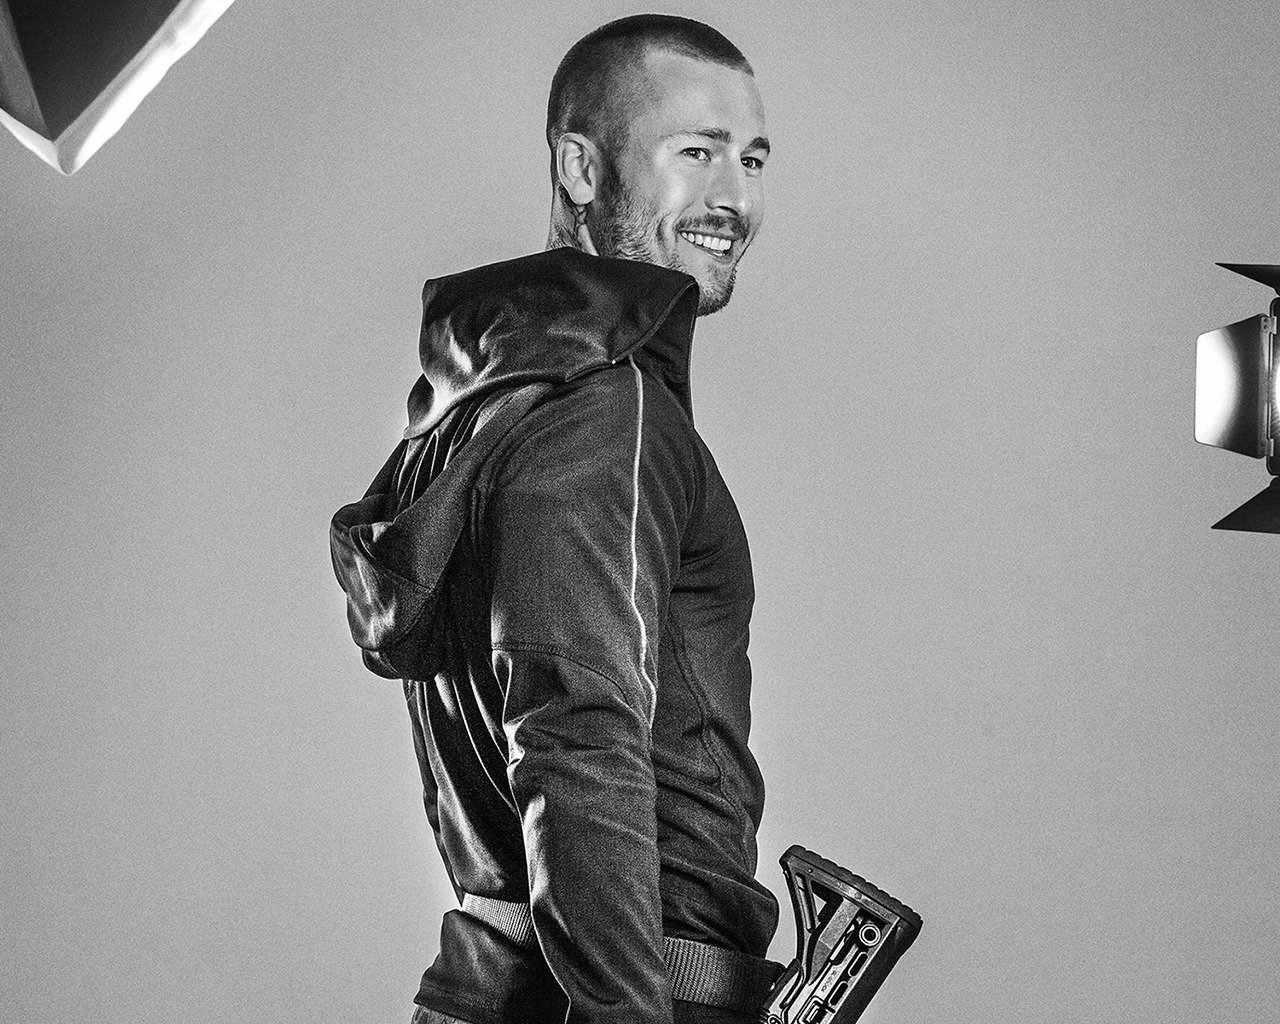 Glen Powell The Expendables 3 for 1280 x 1024 resolution